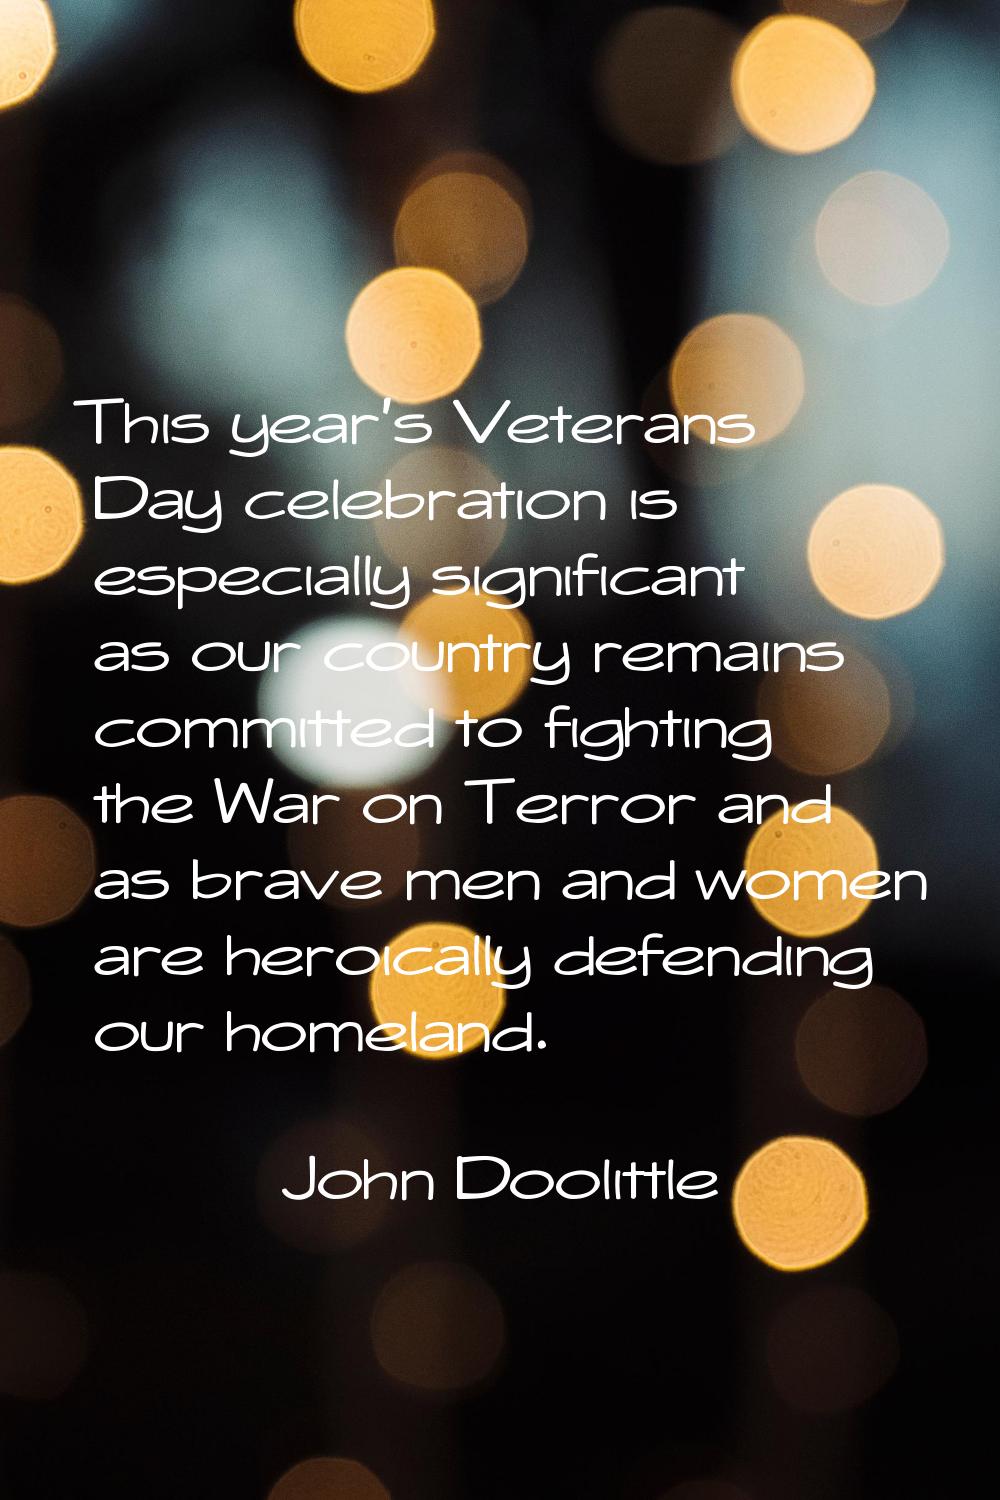 This year's Veterans Day celebration is especially significant as our country remains committed to 